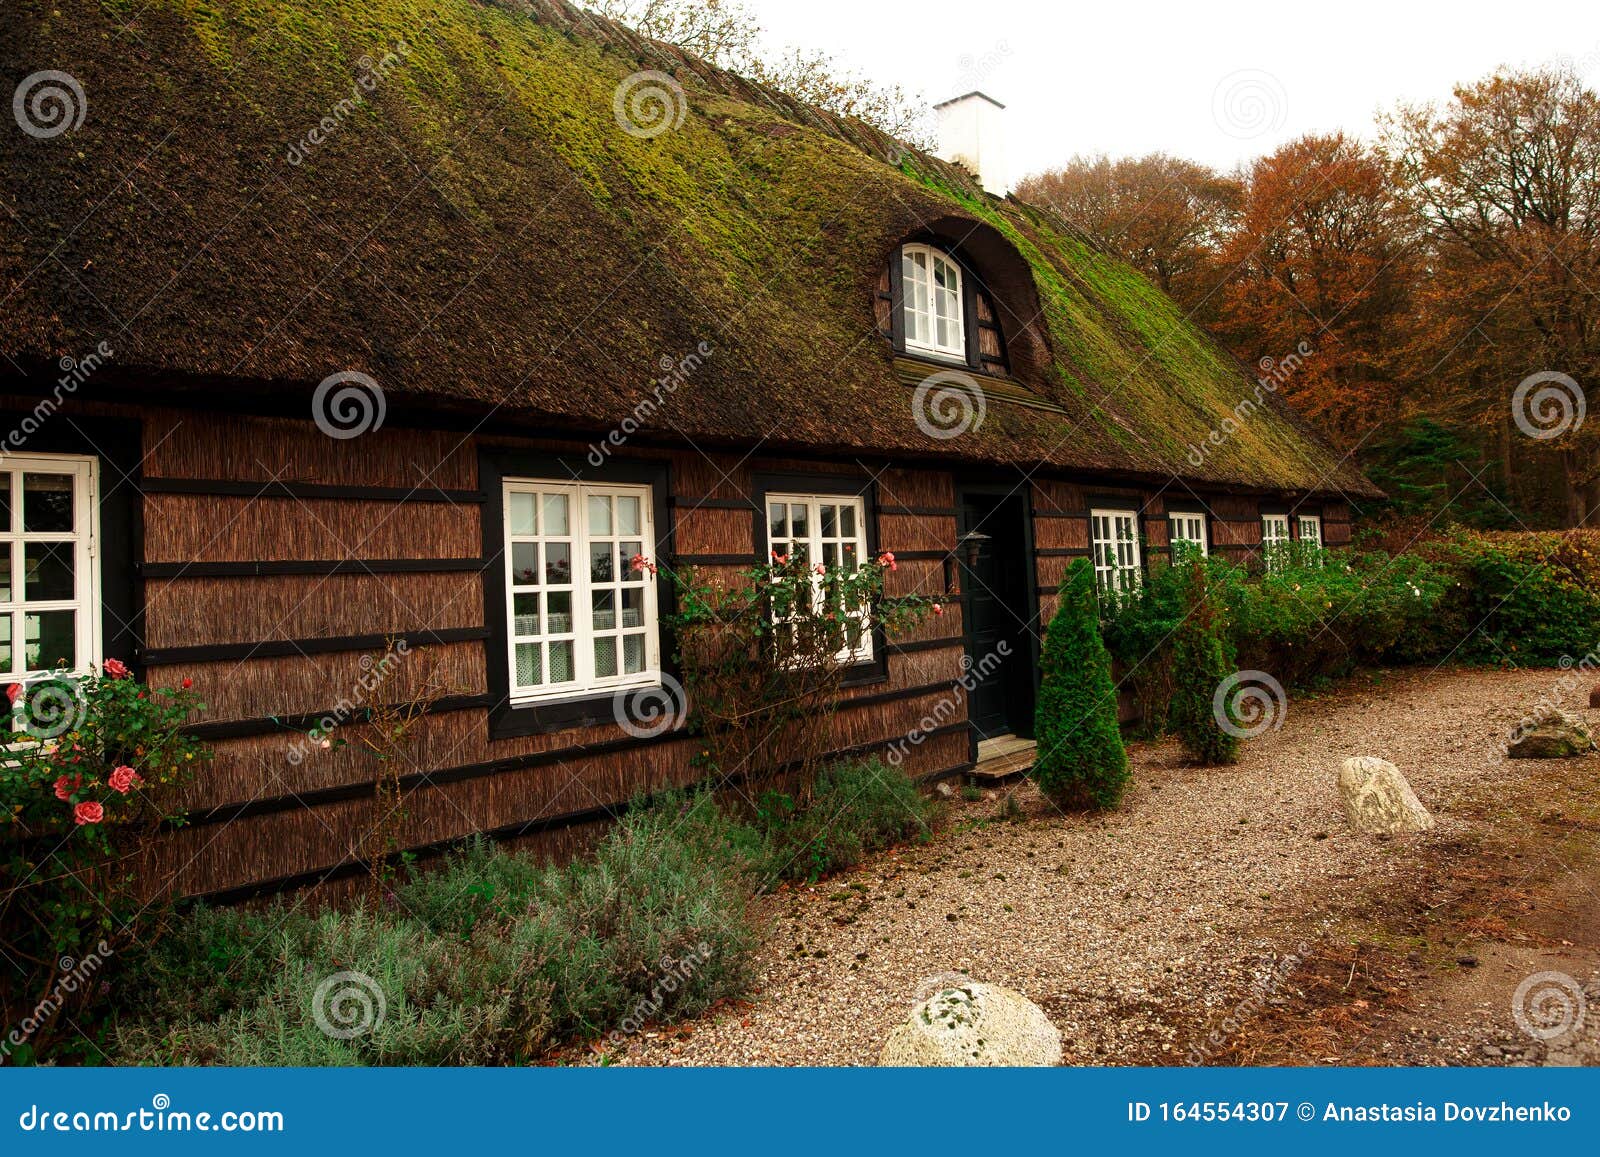 Traditional Danish House in the Small with Small Nice Cottages and Green Fences. NATURE. DENMARK FARM HOUSE Stock - Image of beautiful, 164554307